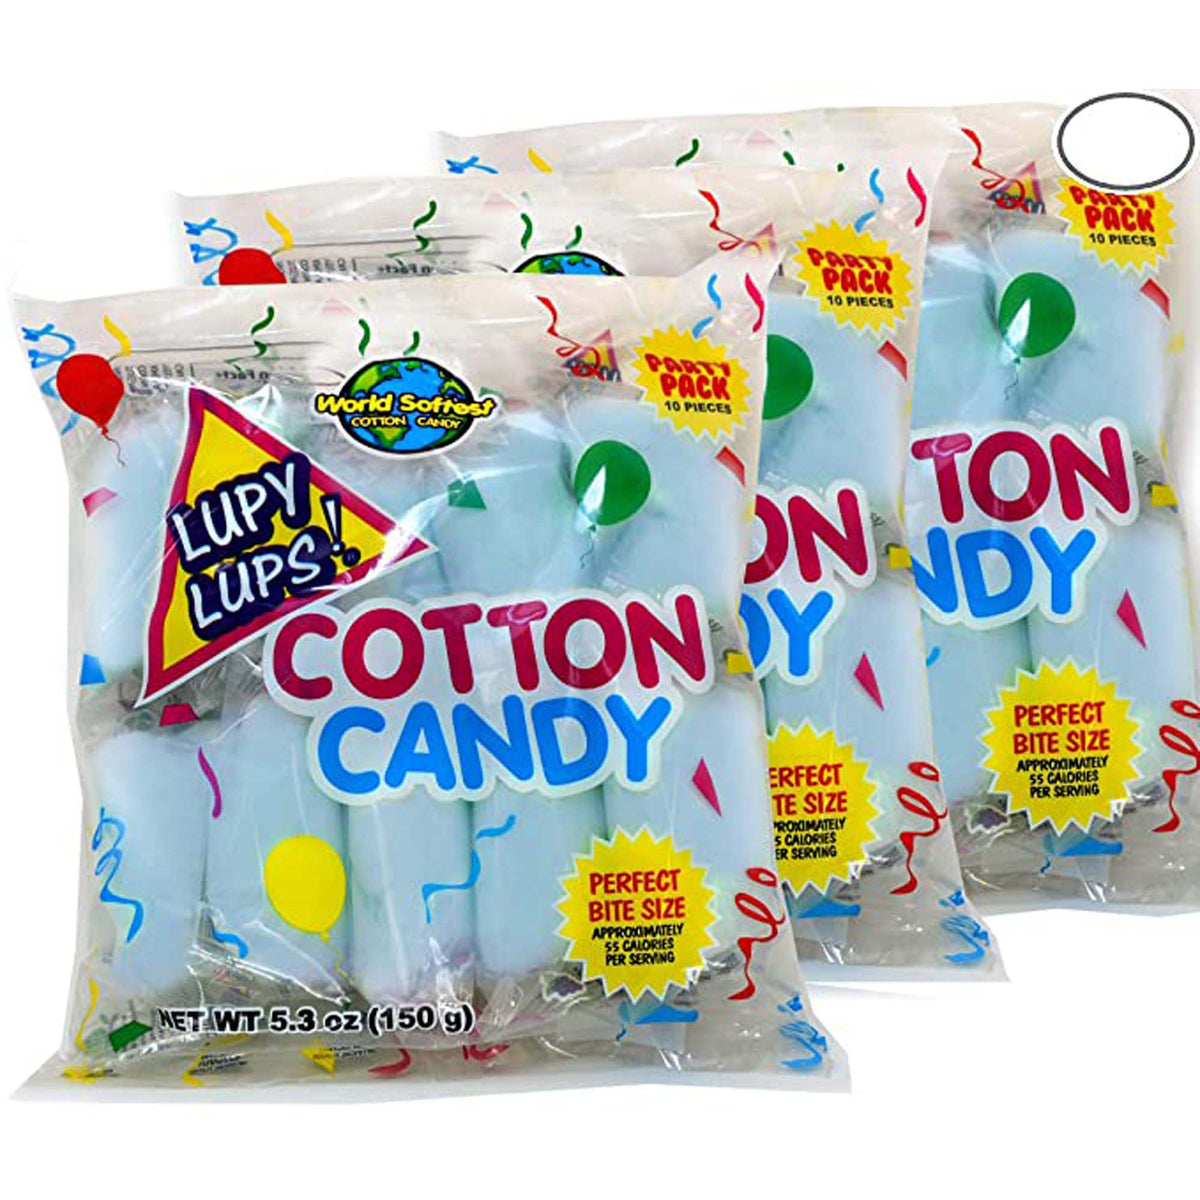 ALBERT & SON INC. Candy Blue Raspberry Cotton Candy, 10 Count 850015776571